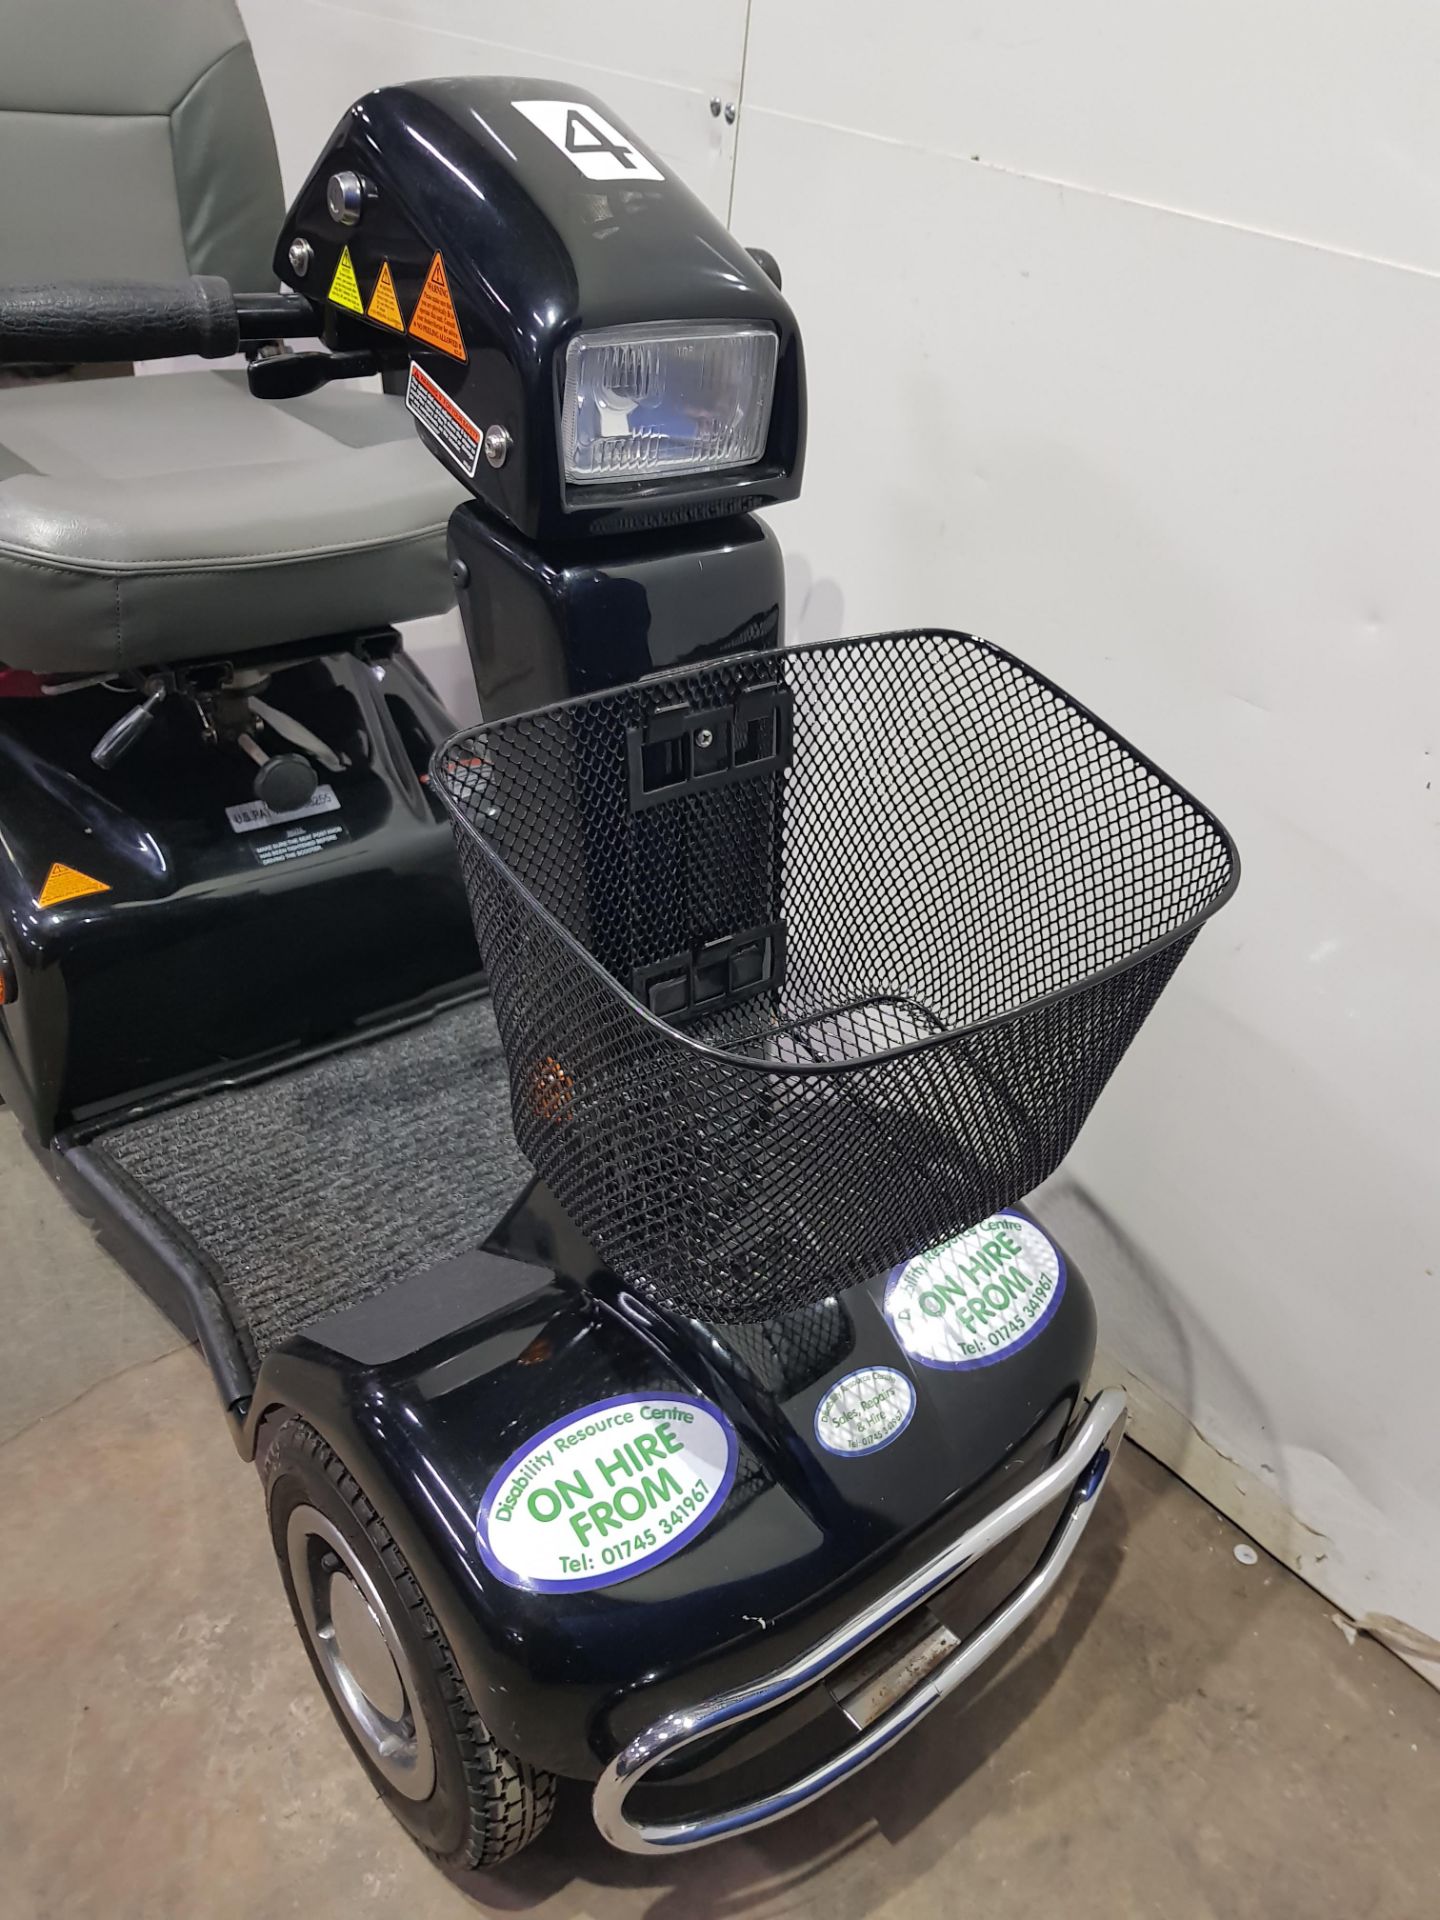 Rascal 388Xl Electric Mobility Scooter 2019 - Image 2 of 10